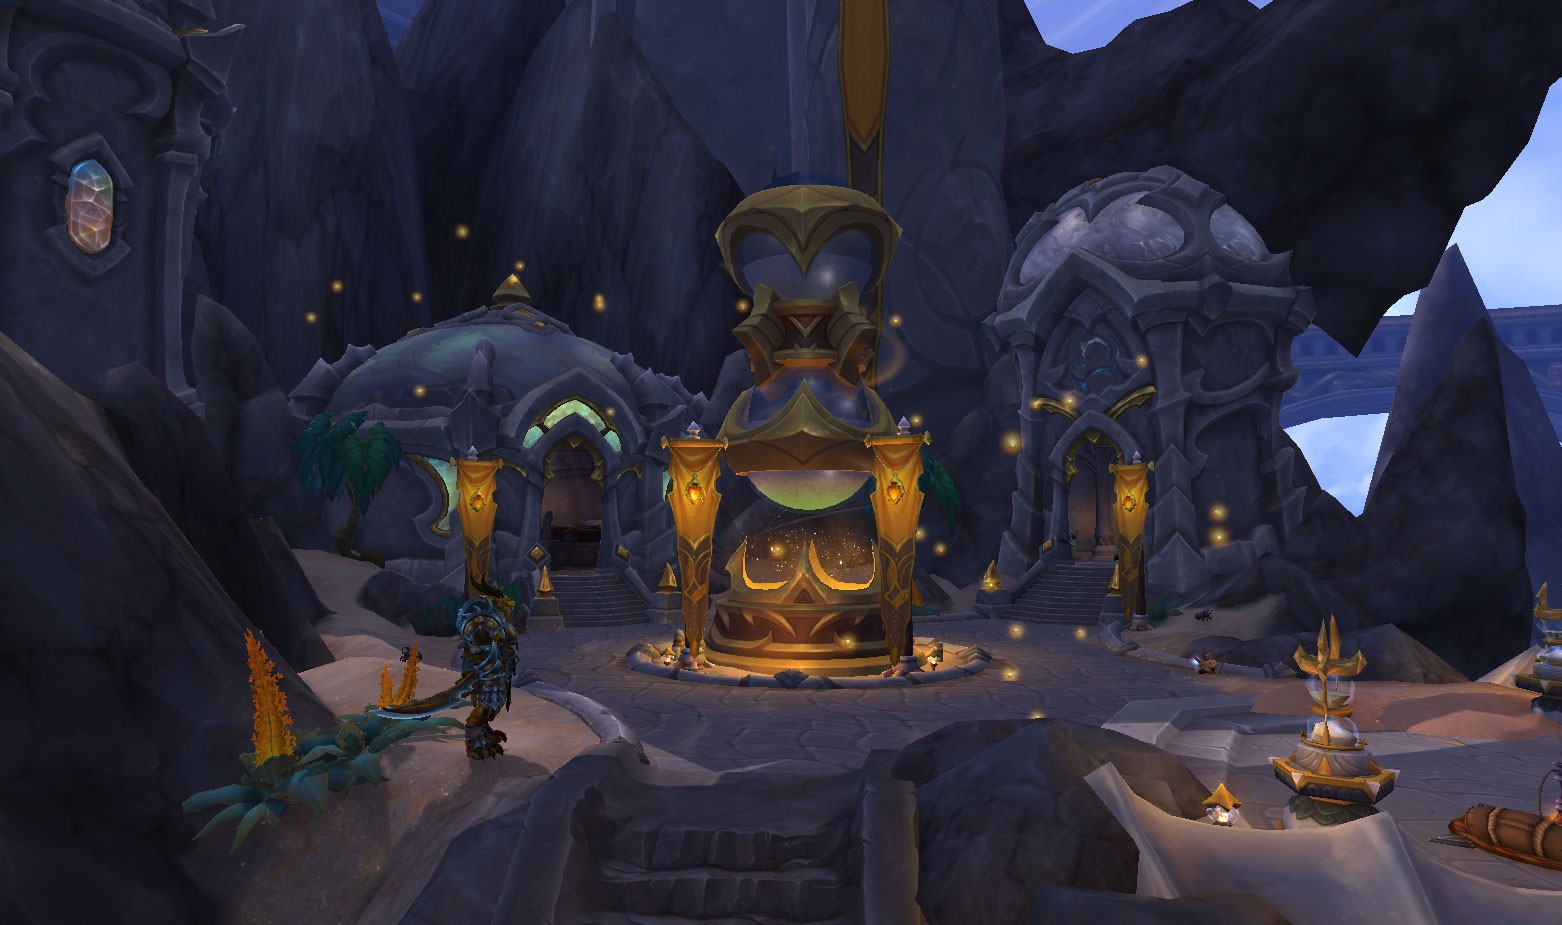 Bronze Dragonflight area with a large Hour Glass in the center court.